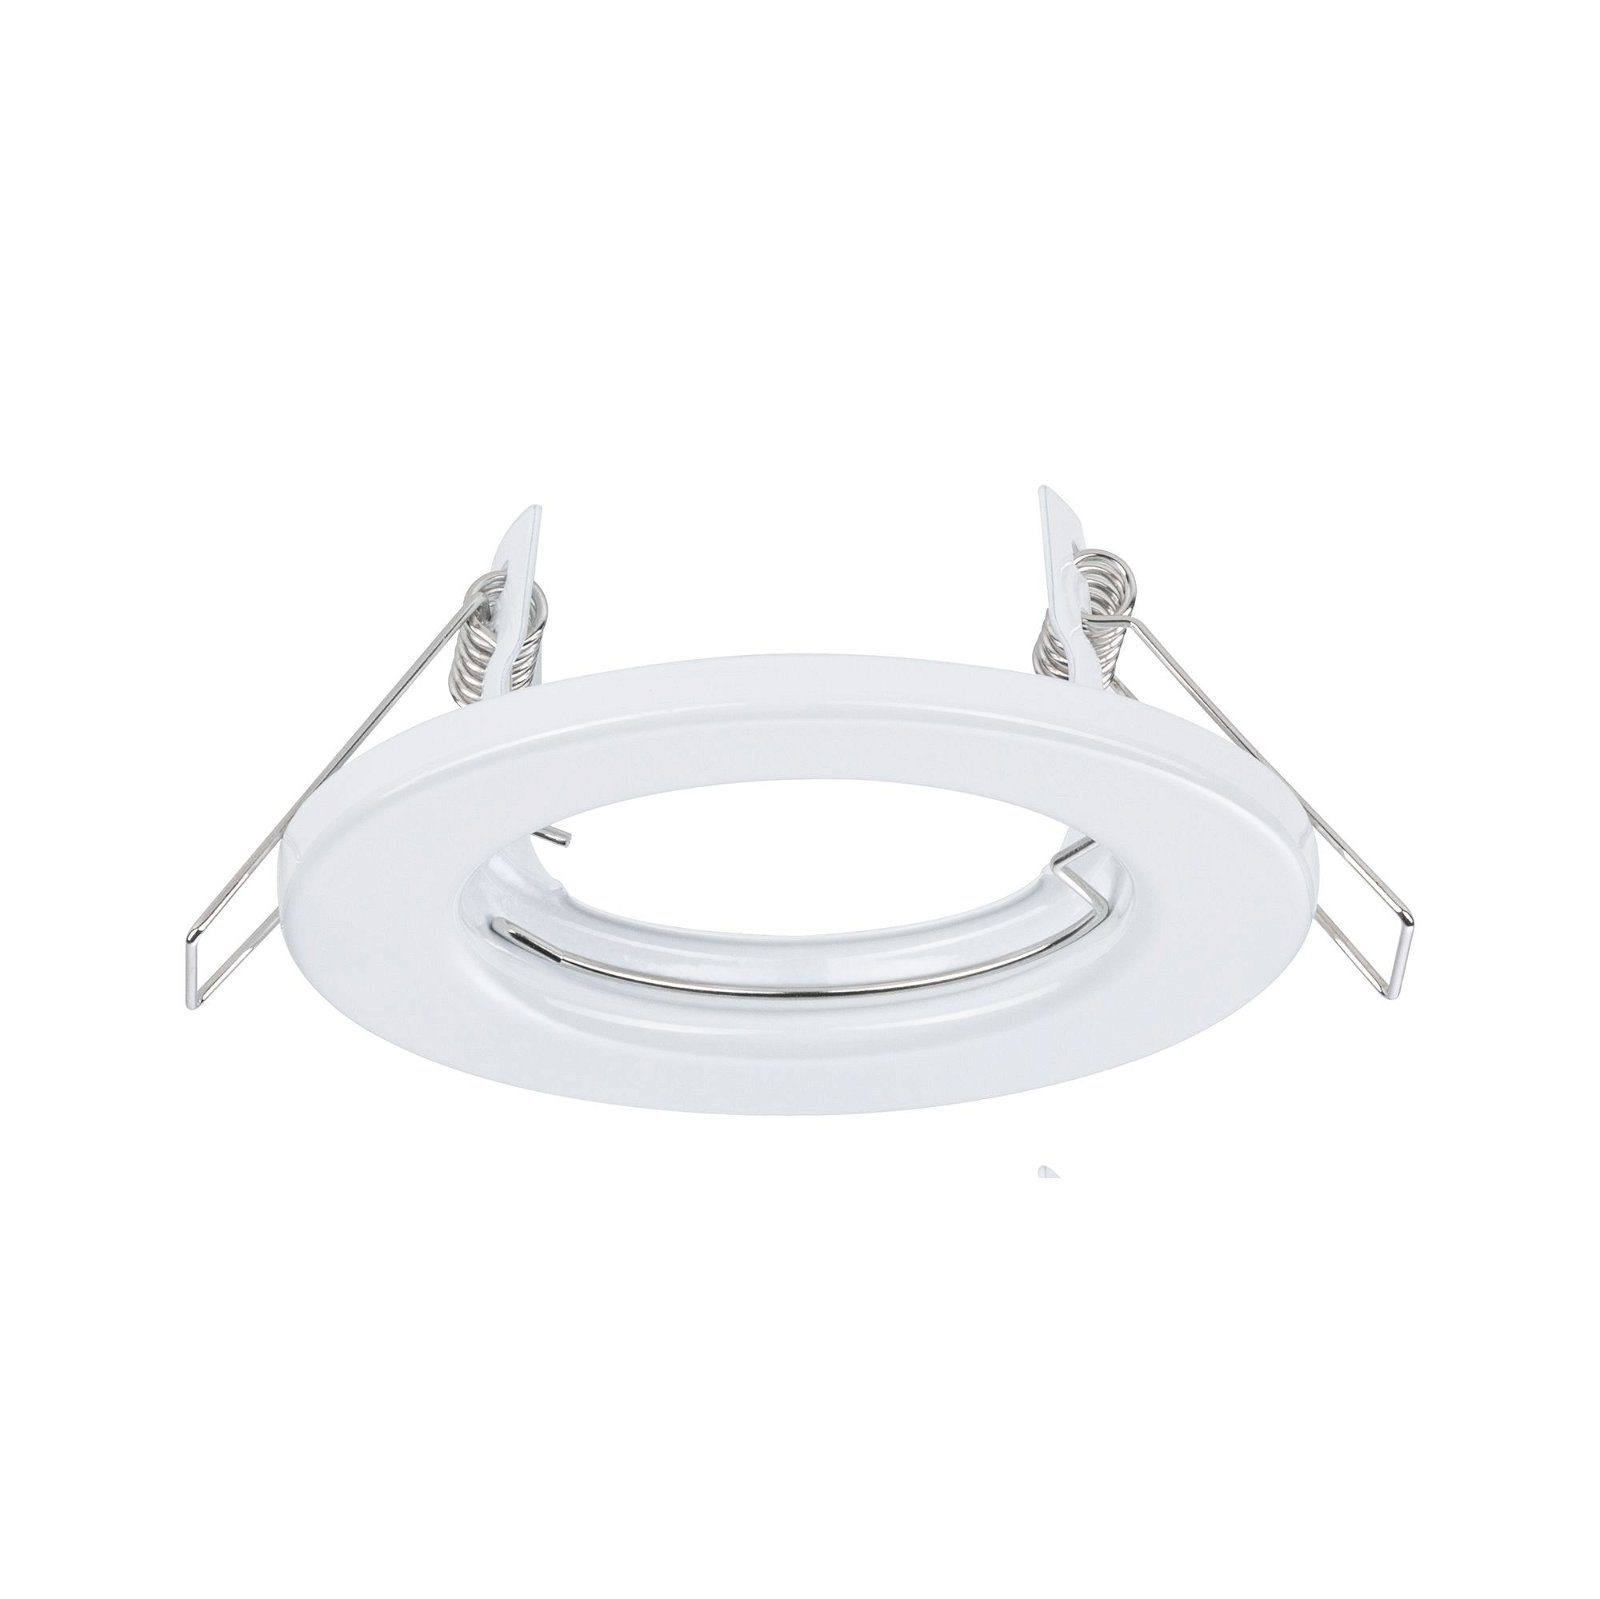 Recessed luminaire 3-piece set Rigid round 80mm GU10 max. 3x10W 230V dimmable White